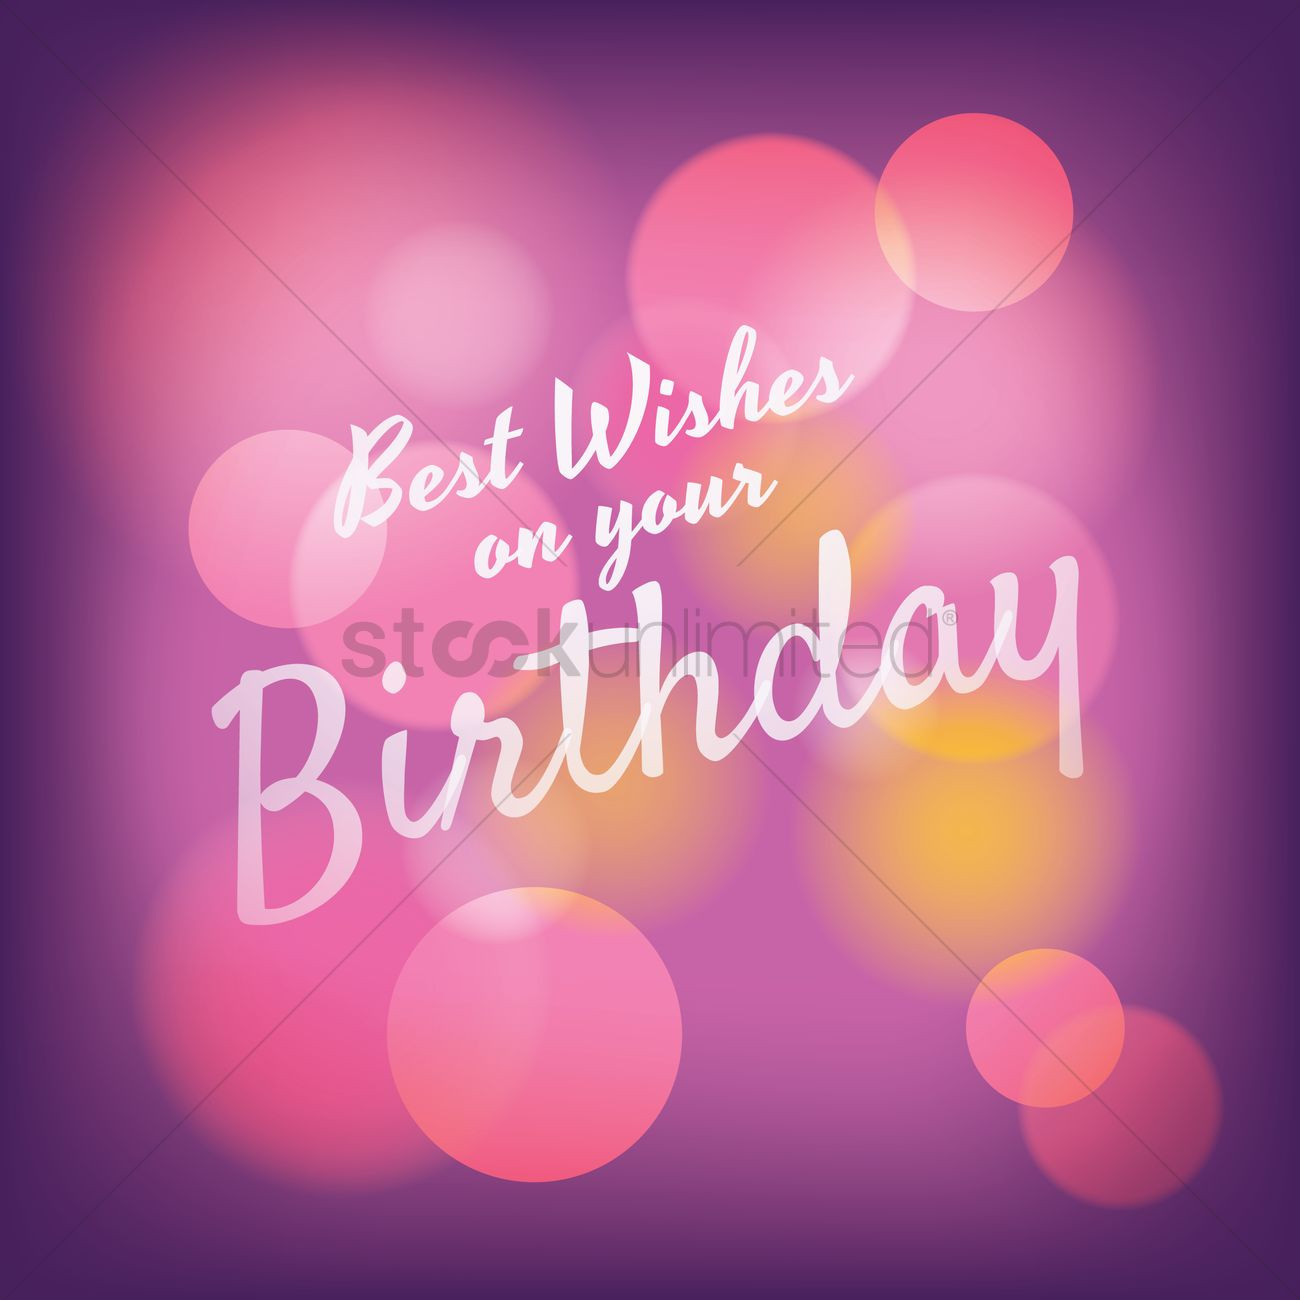 Best Wishes For Your Birthday
 Best wishes on your birthday greeting Vector Image